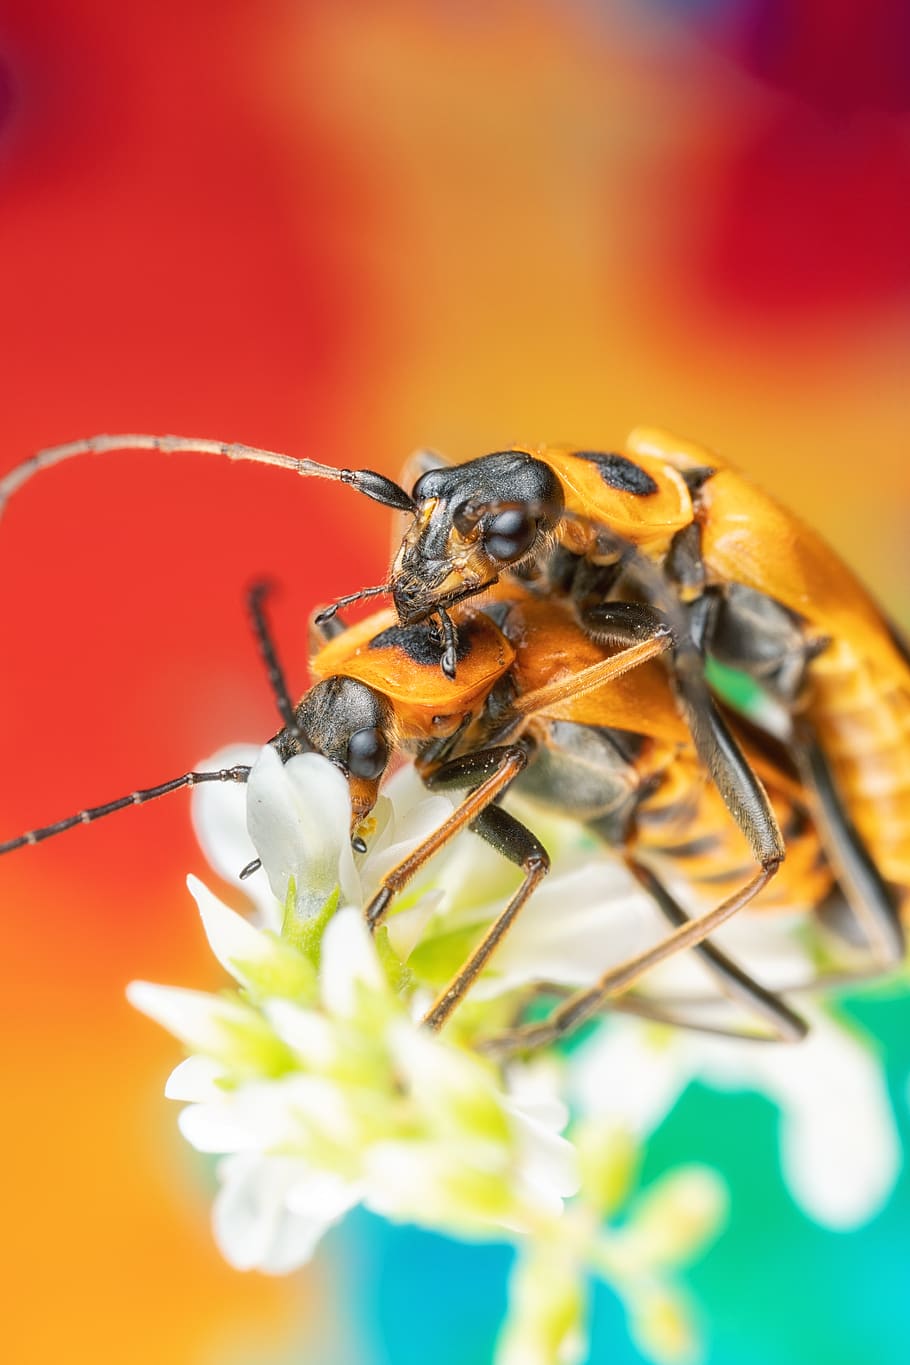 goldenrod soldier beetle, beetles, mating beetles, mating bugs, mating in nature, natural, nature, insect, insects, spring